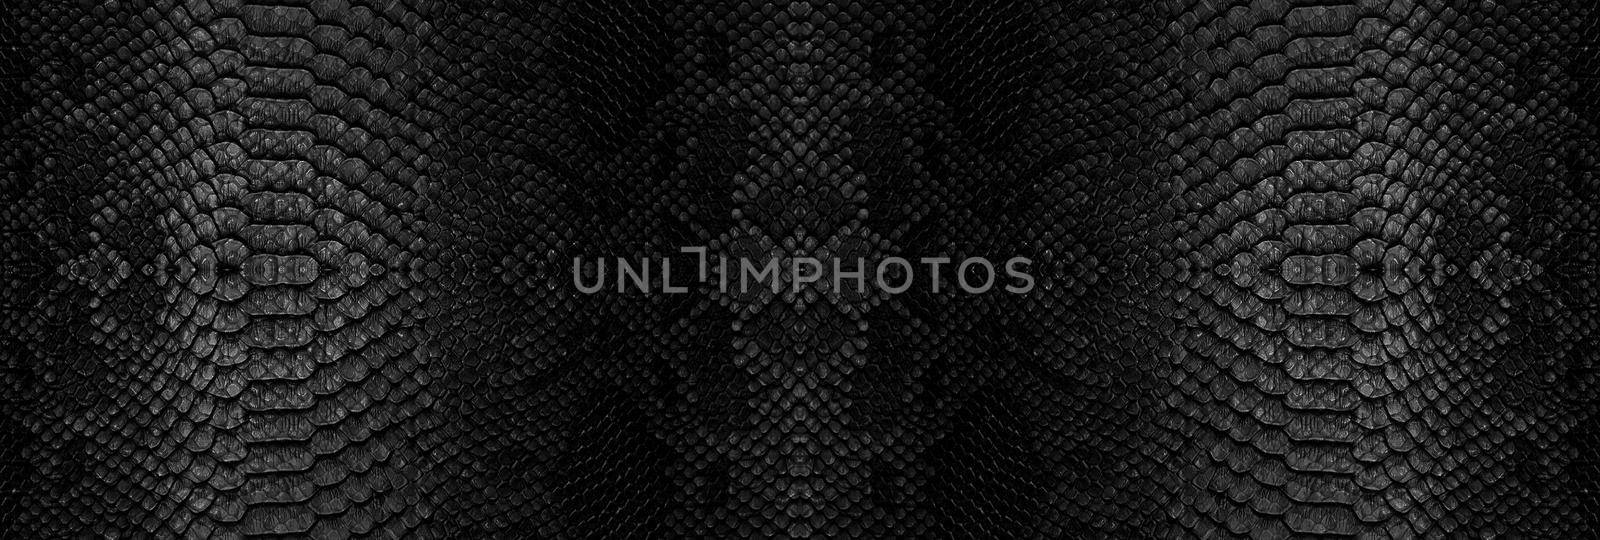 Snake skin texture closeup background. Panoramic web banner with copy space background